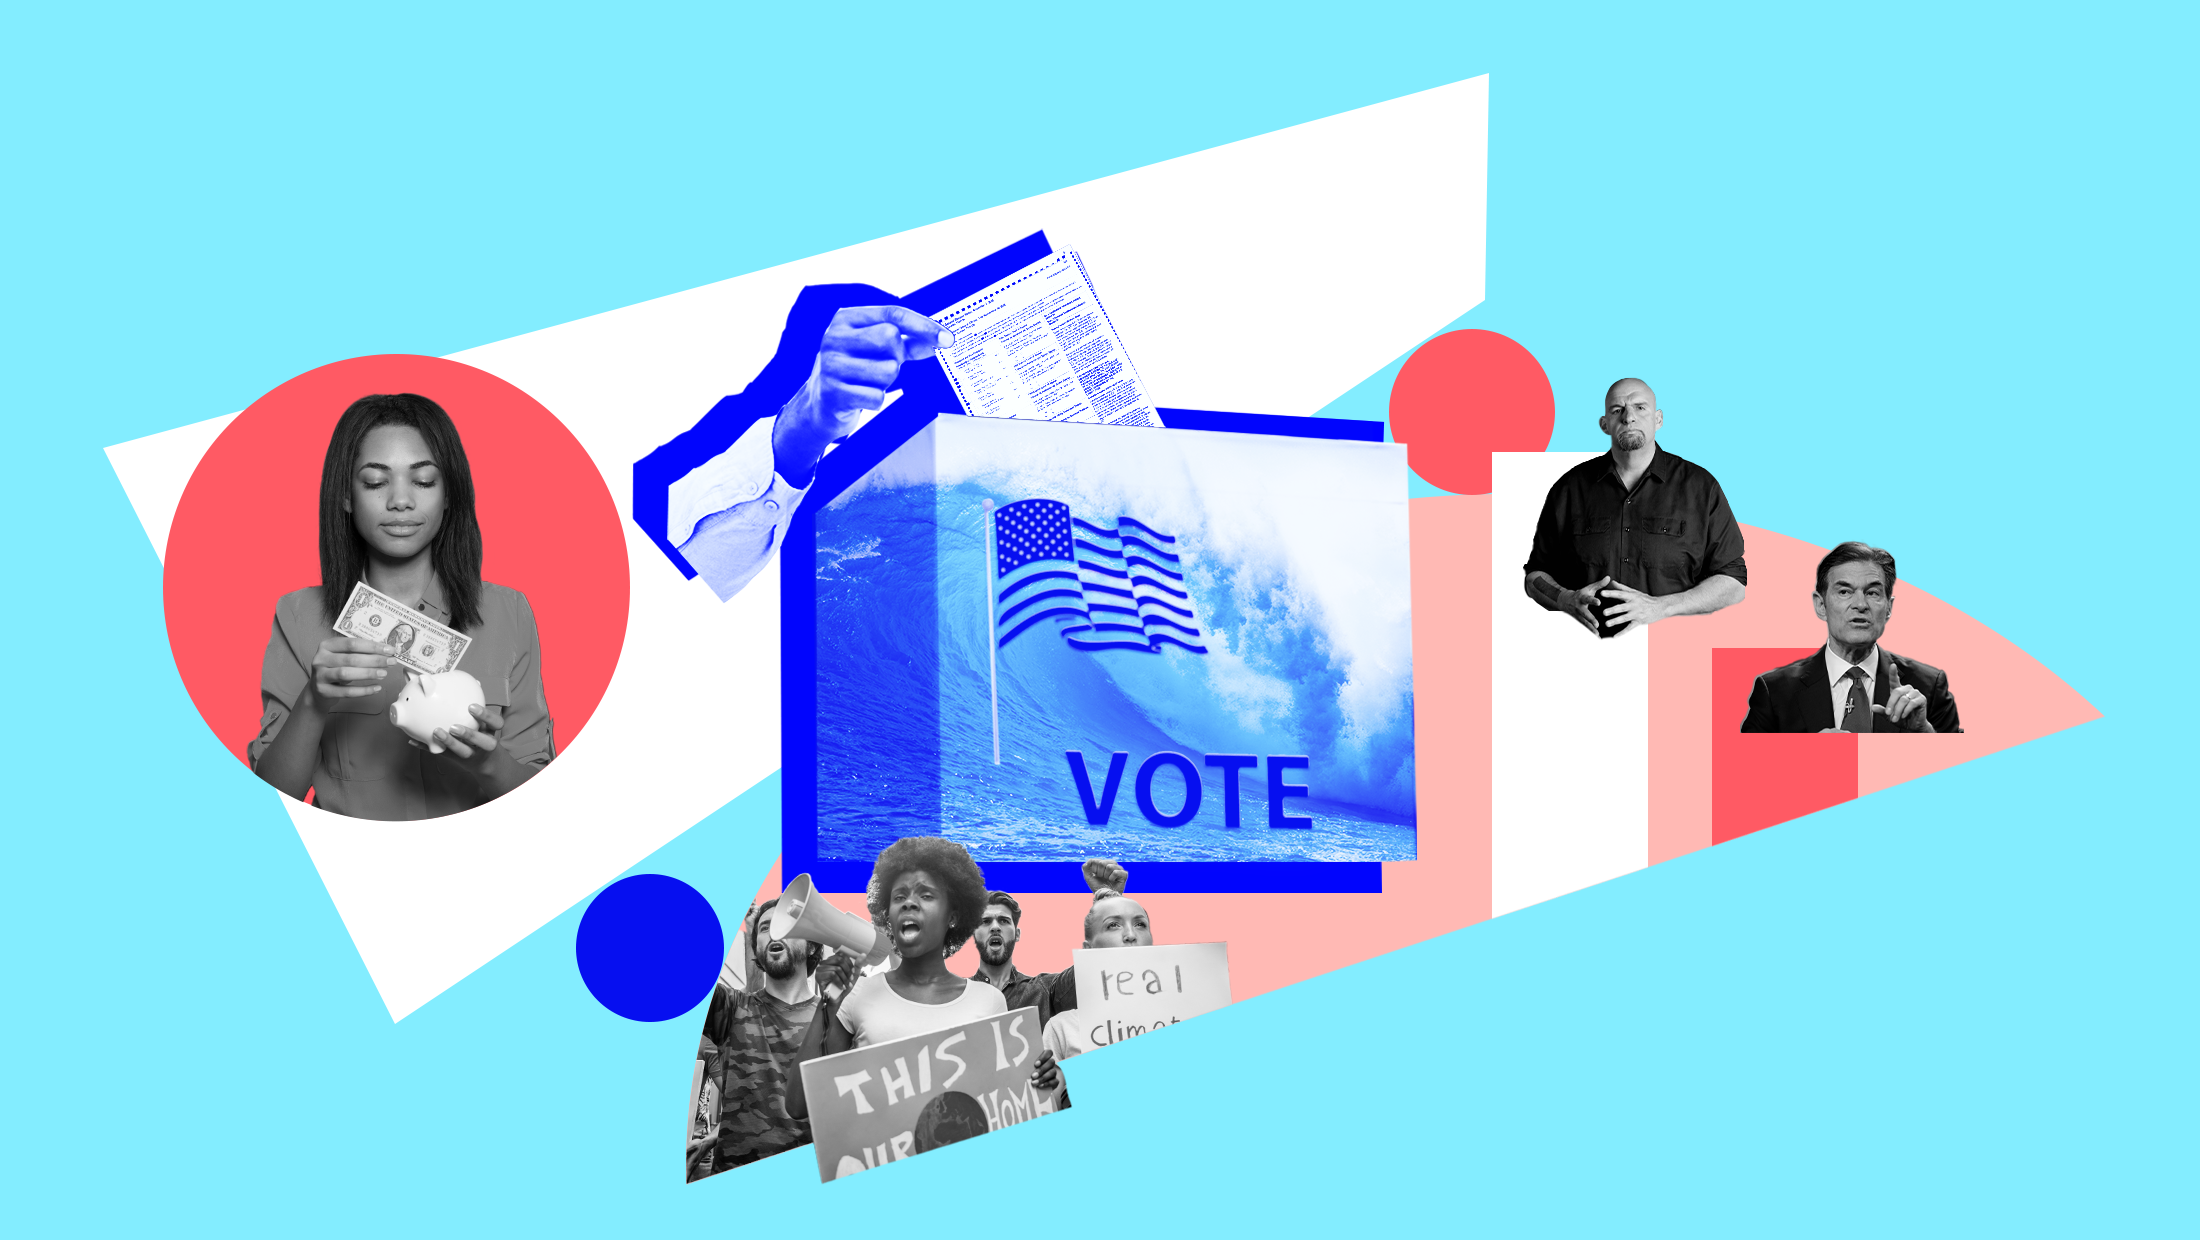 Light blue background with image of blue wave, an American flag and the word "VOTE" laid over a ballot box and someone inserting their ballot into the box, a black and white image of someone inserting money into a piggy bank, black and white images of John Fetterman and Mehmet Oz and a black and white image of people protesting with a megaphone and holding up signs.